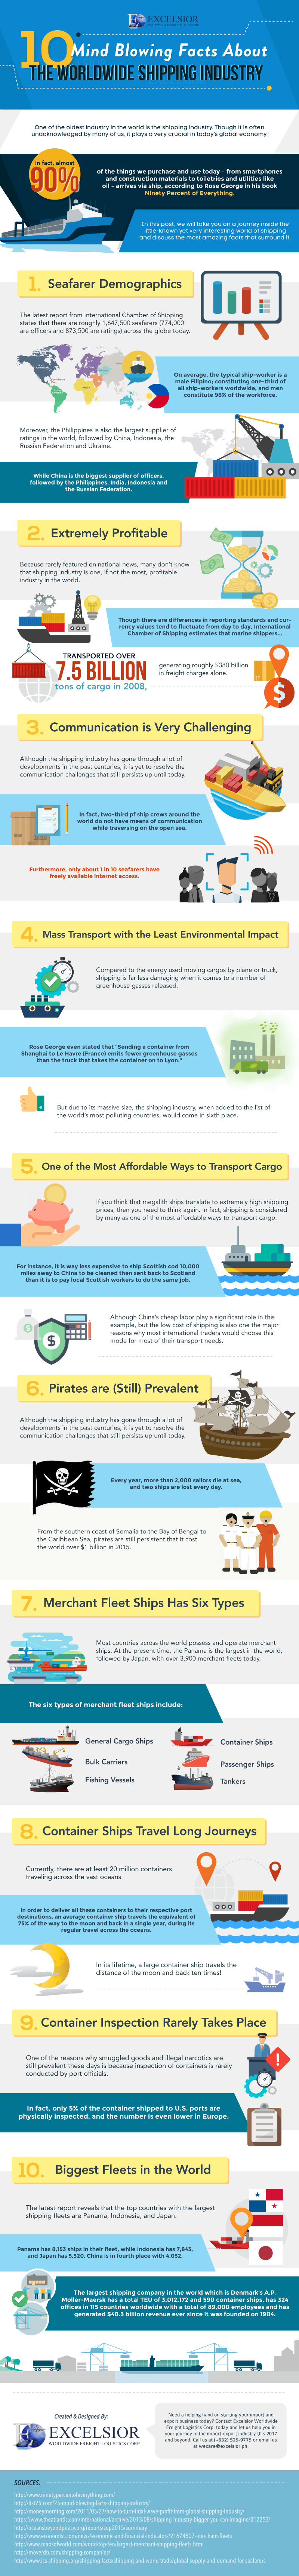 10 Mind Blowing Facts About the Worldwide Shipping Industry